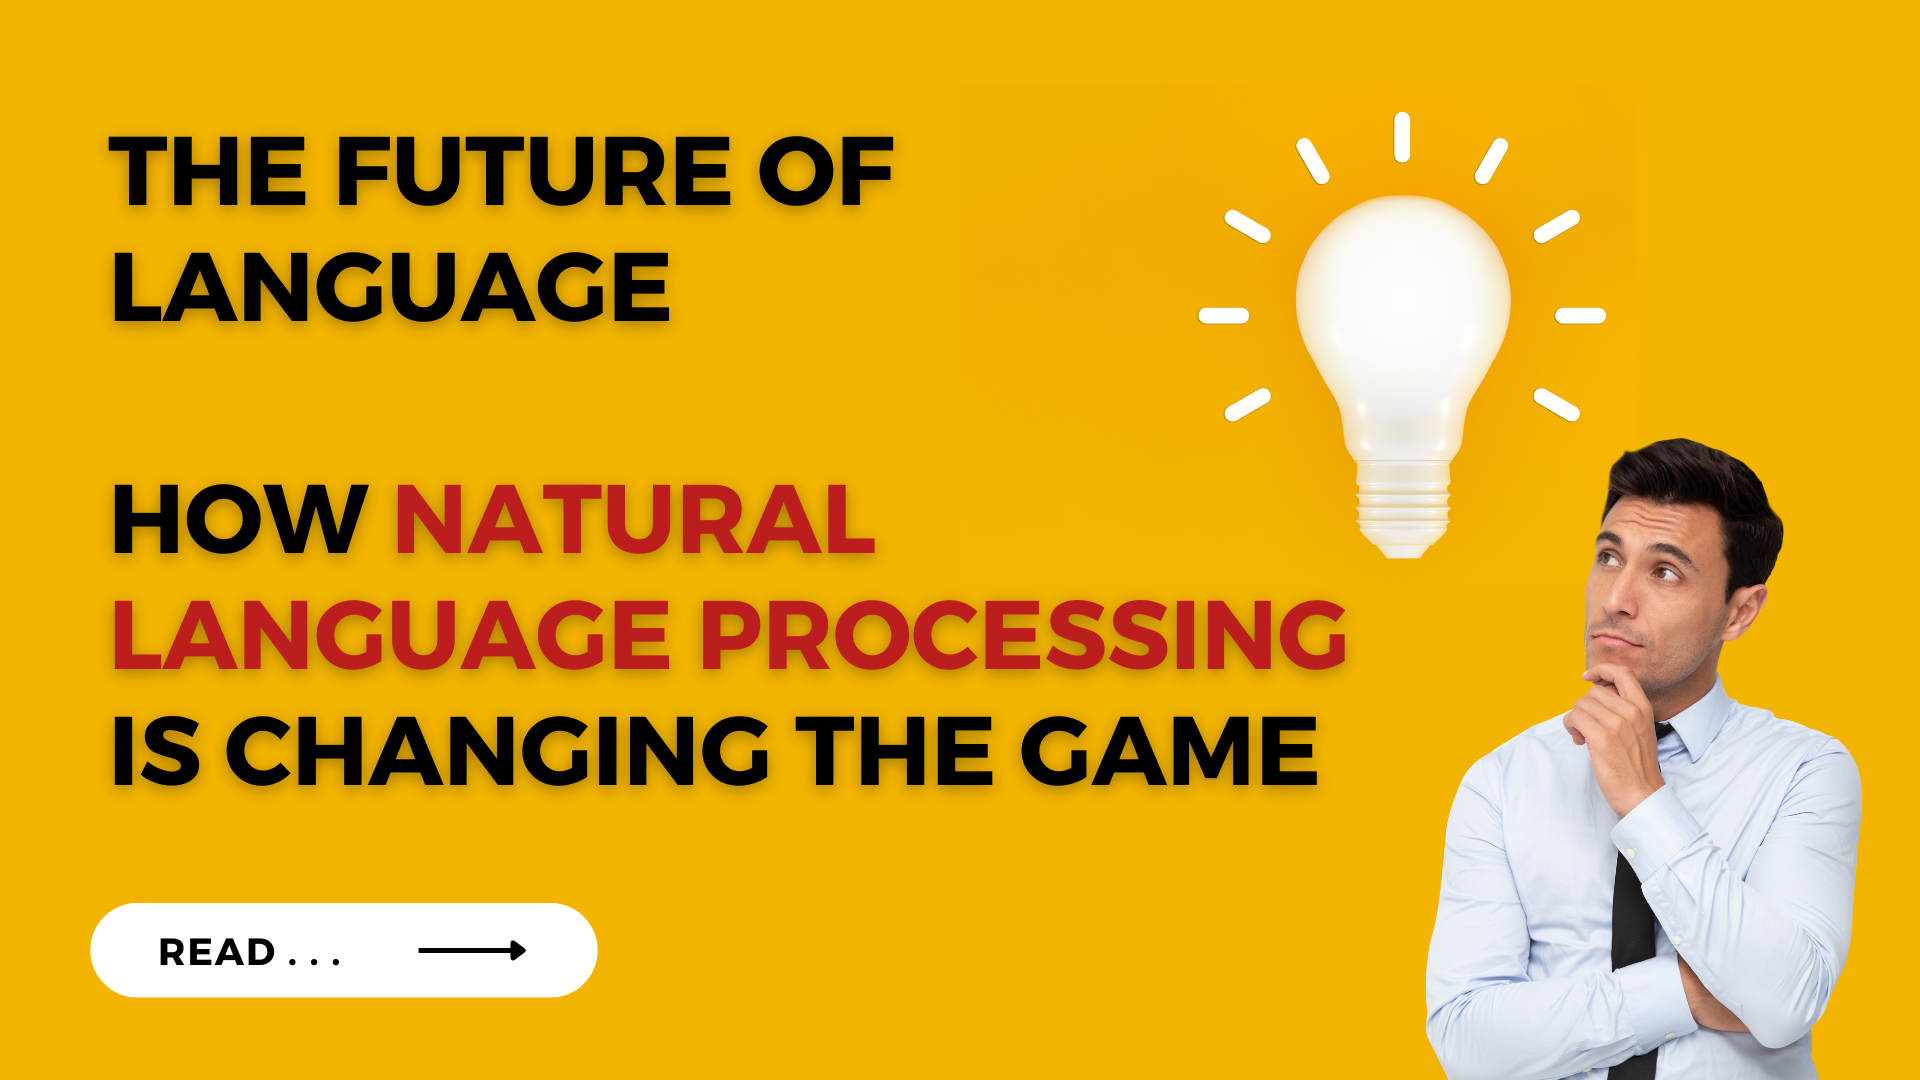 The Future of Language: How Natural Language Processing is Changing the Game